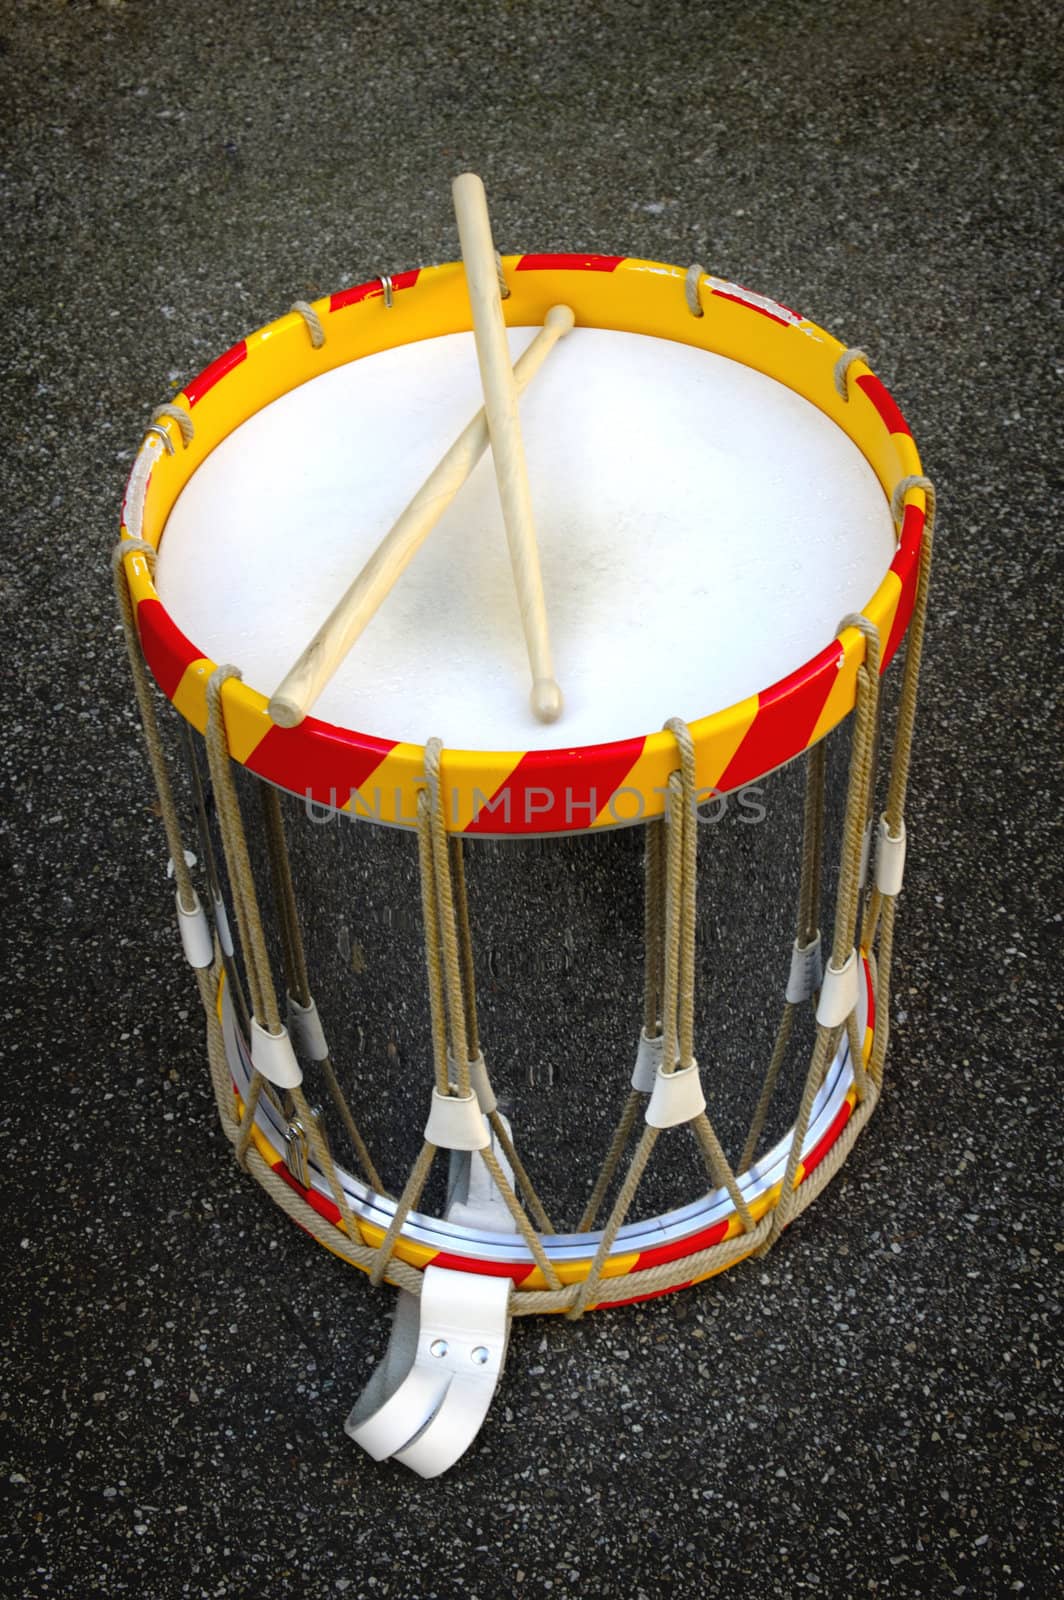 A military bandsman's drum, with drumsticks, standing on the ground.